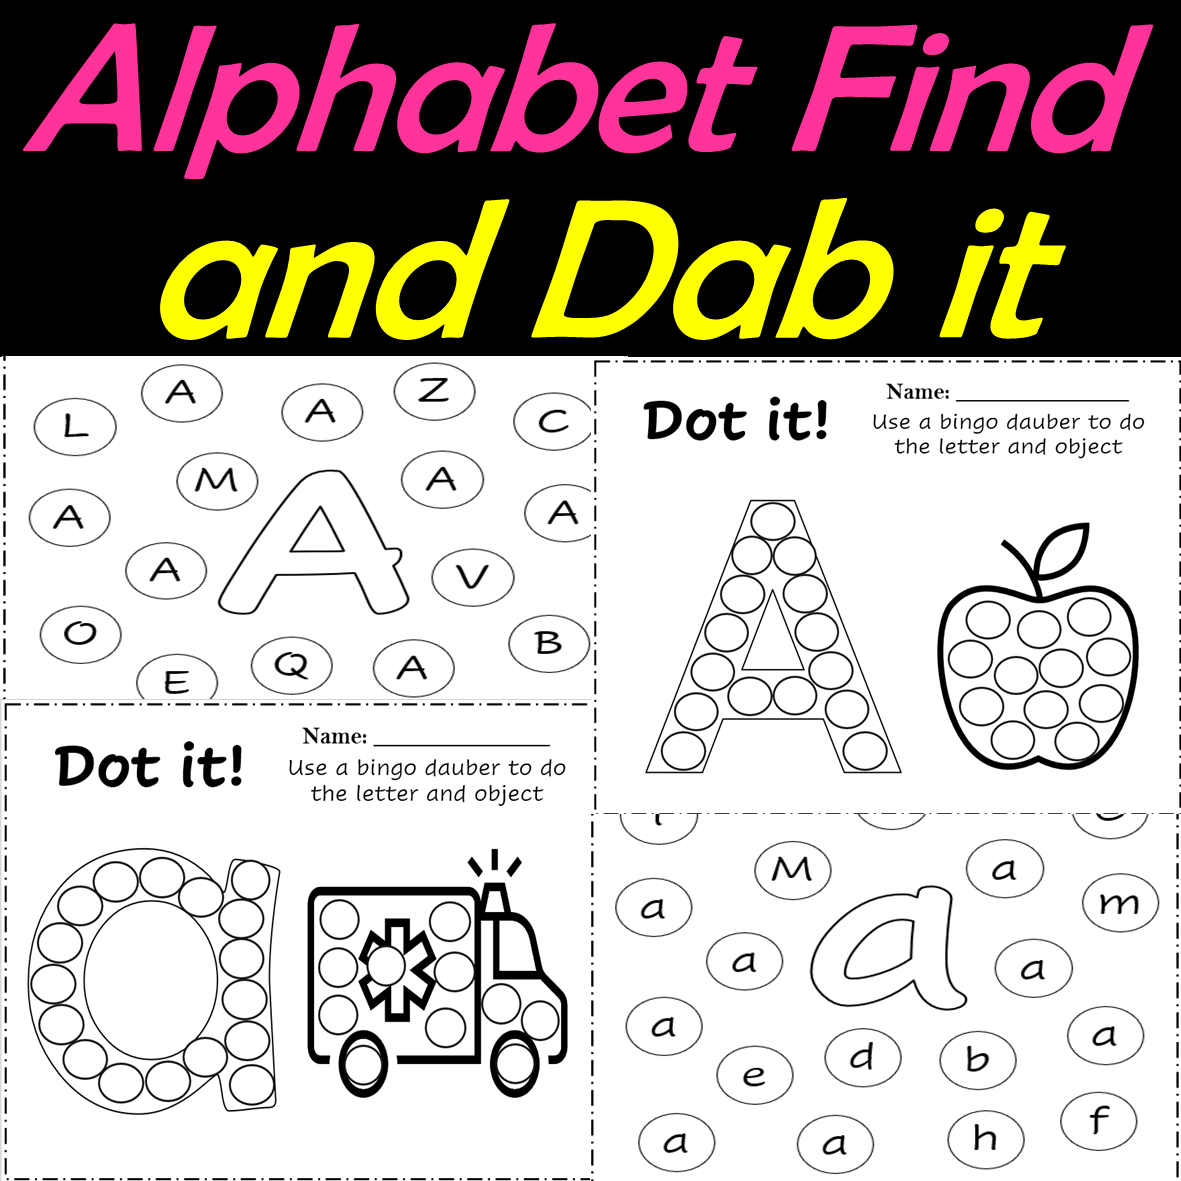 Alphabet/Letter Find and Dab It! | Letter Identification - 100+ pages